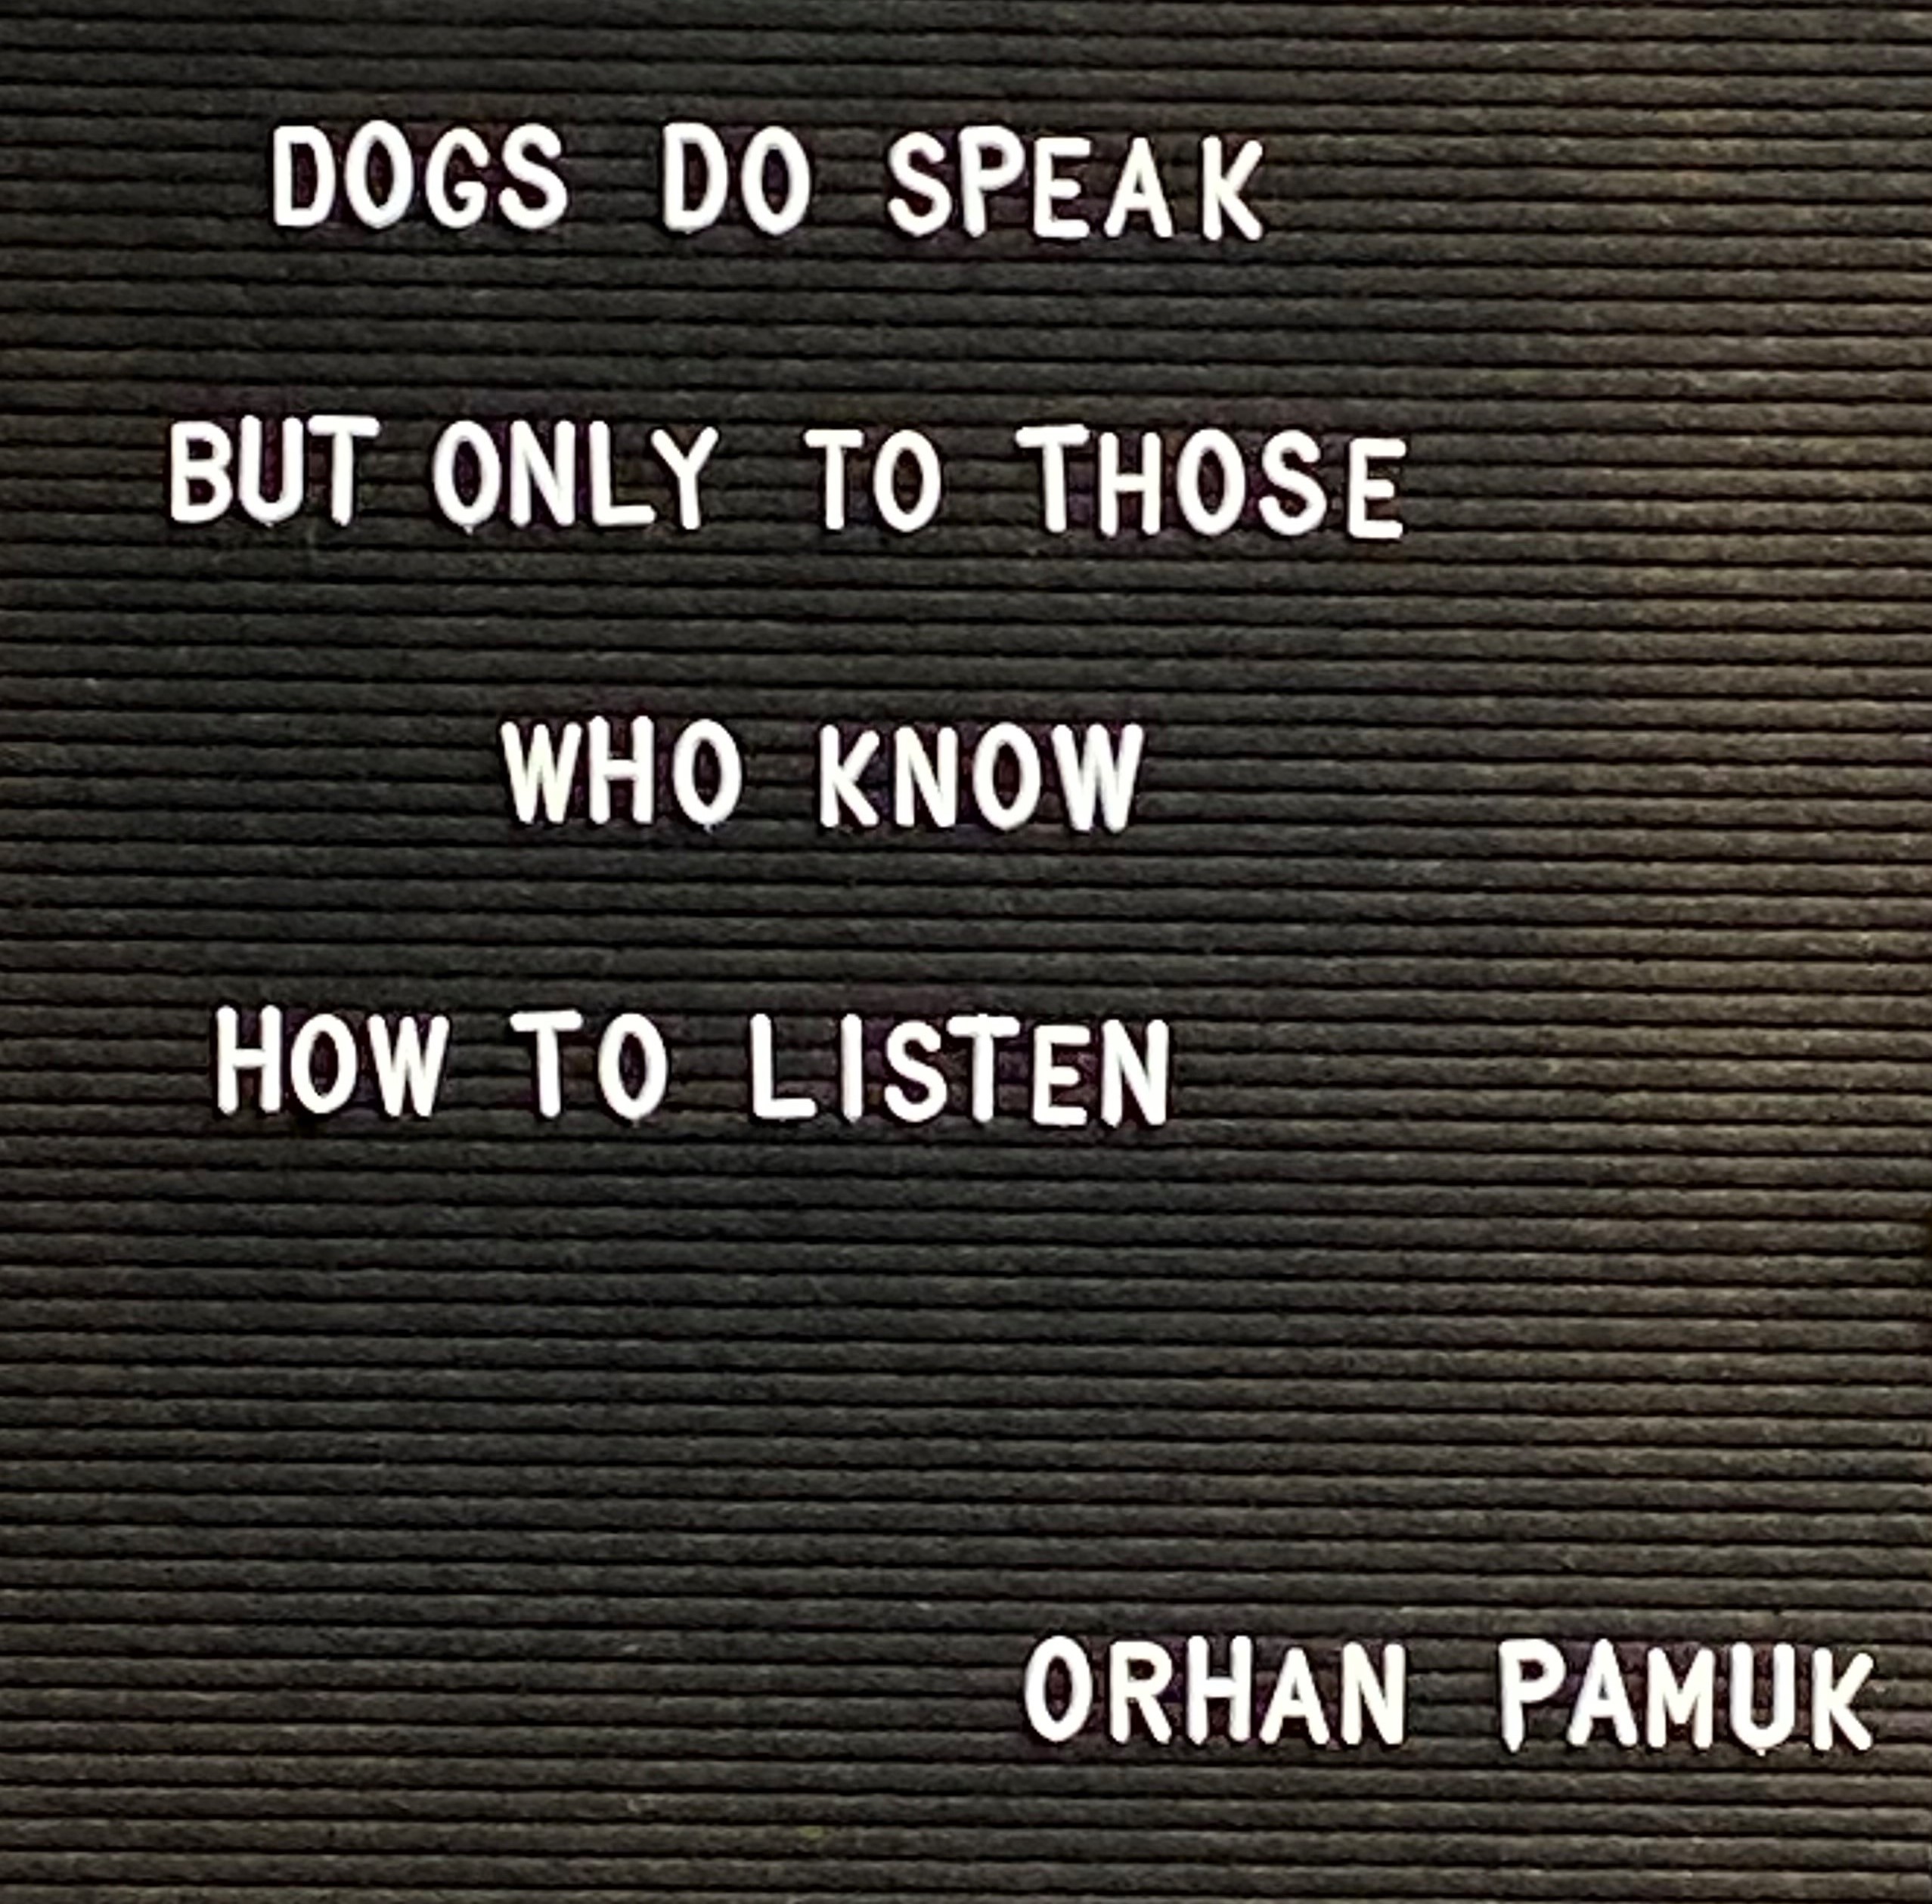 Orhan Pamuk Quote About Dogs